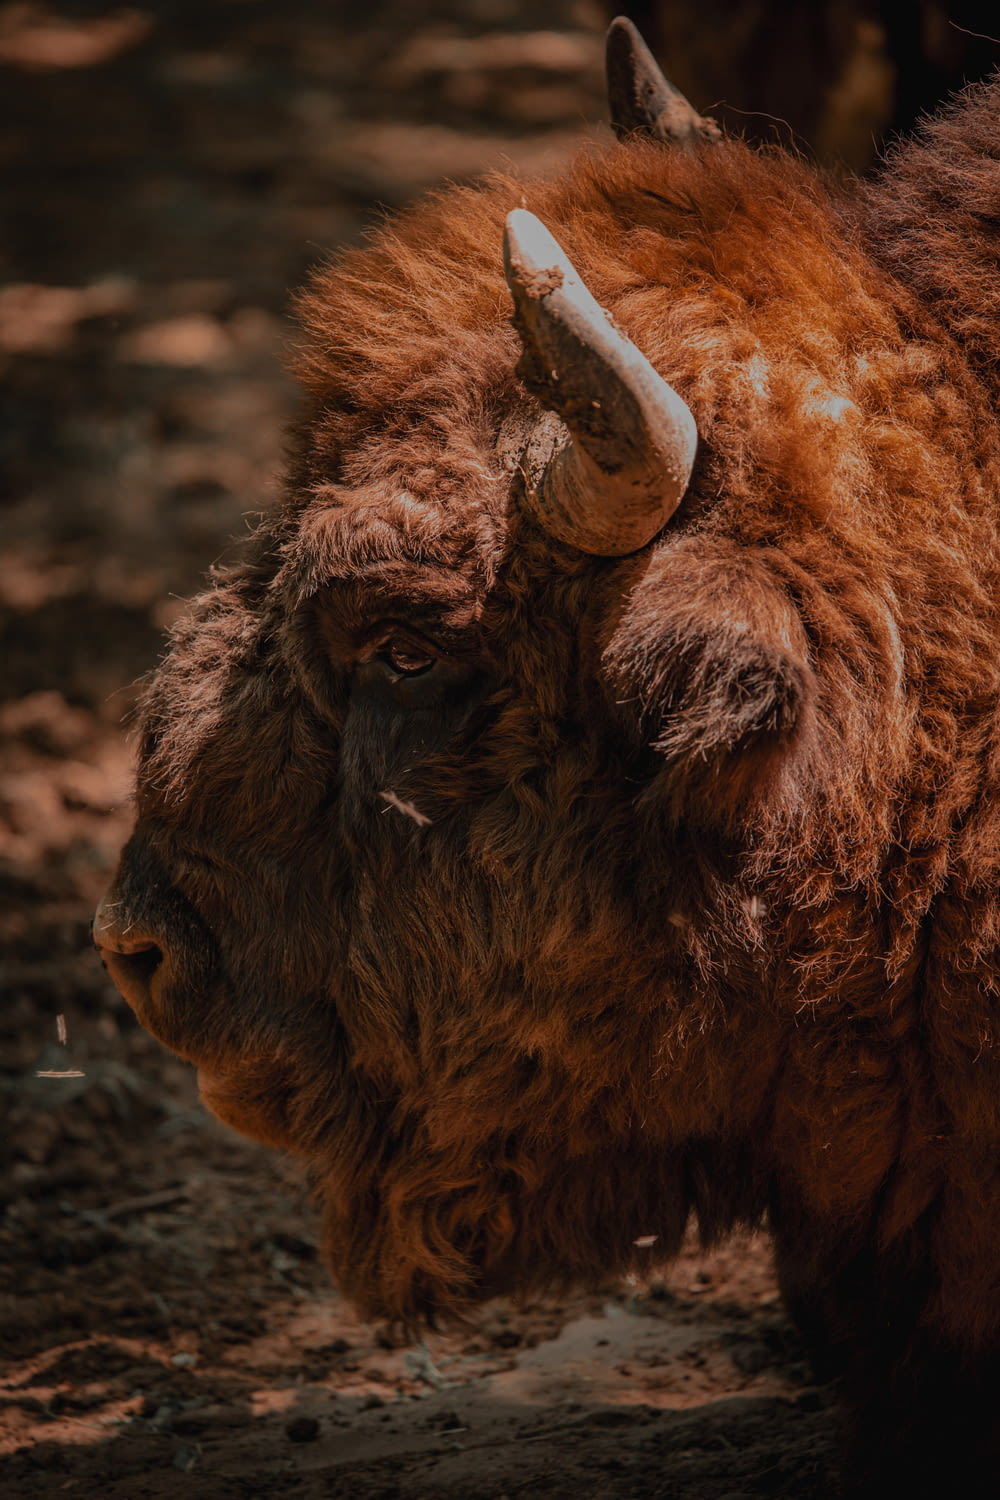 a close up of a bison with a long horn